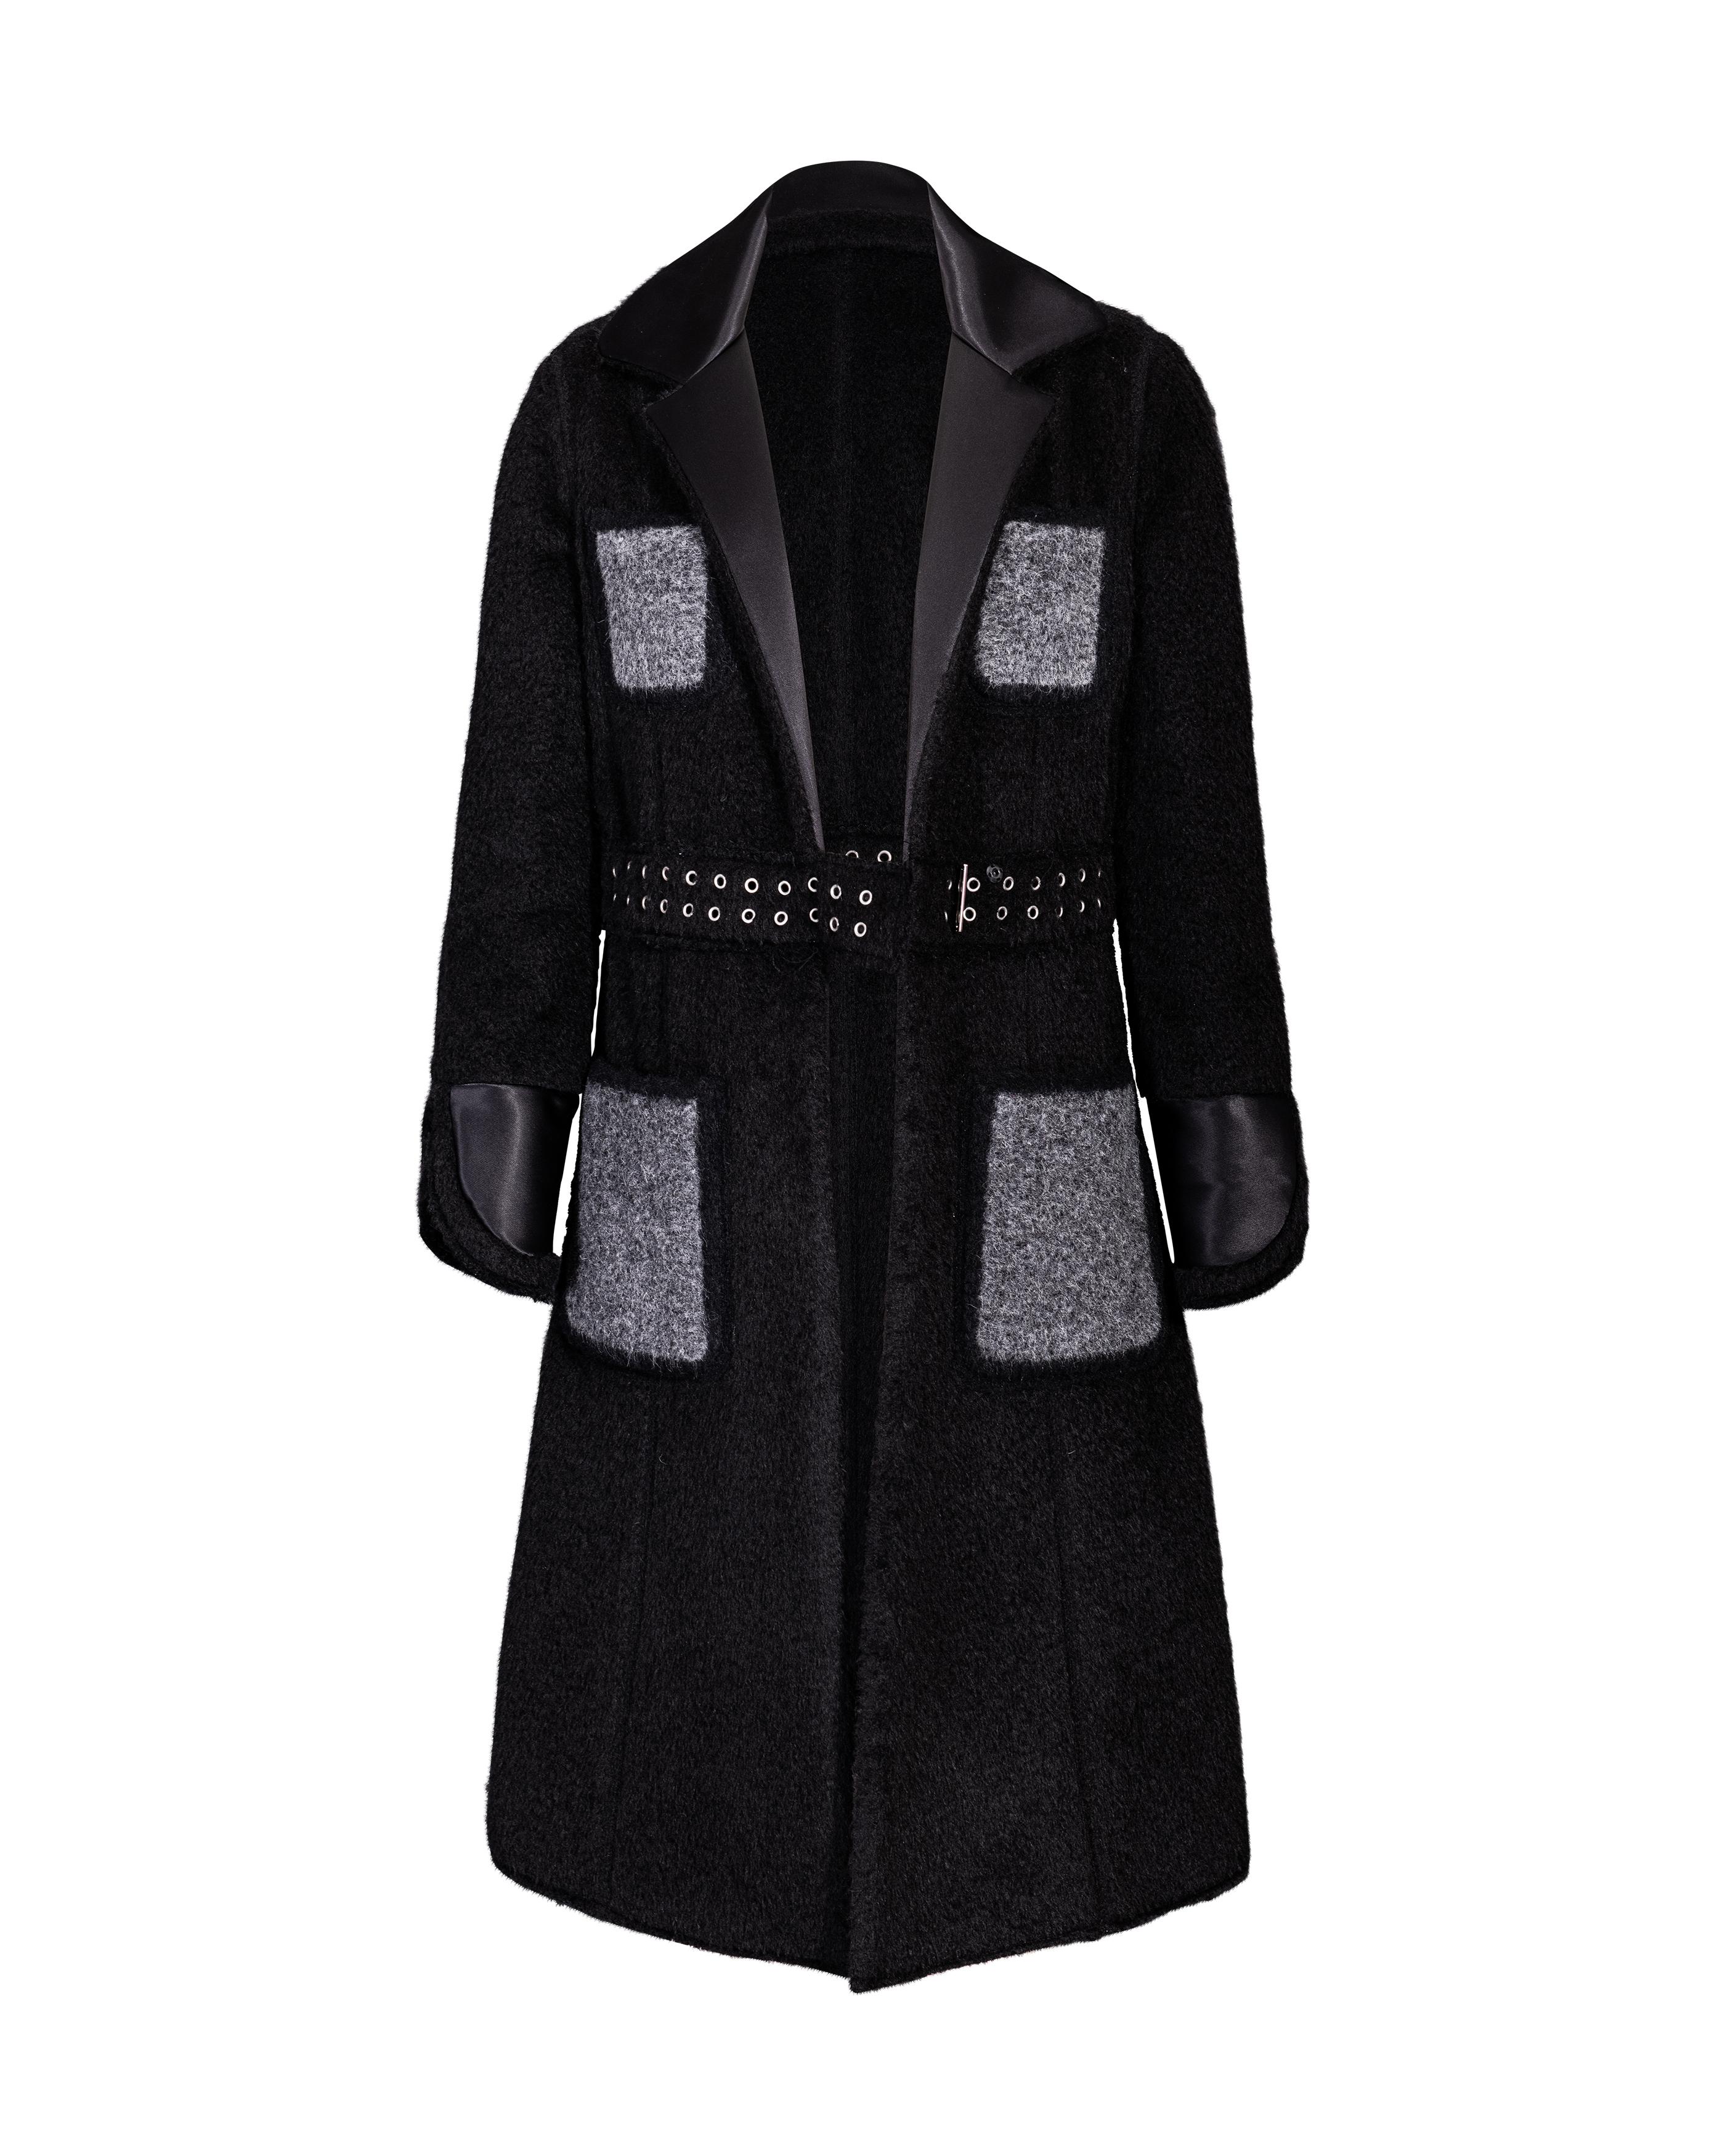 Pre-Fall 2014 Céline by Phoebe Philo Black Shearling Coat with Gray Accents For Sale 4